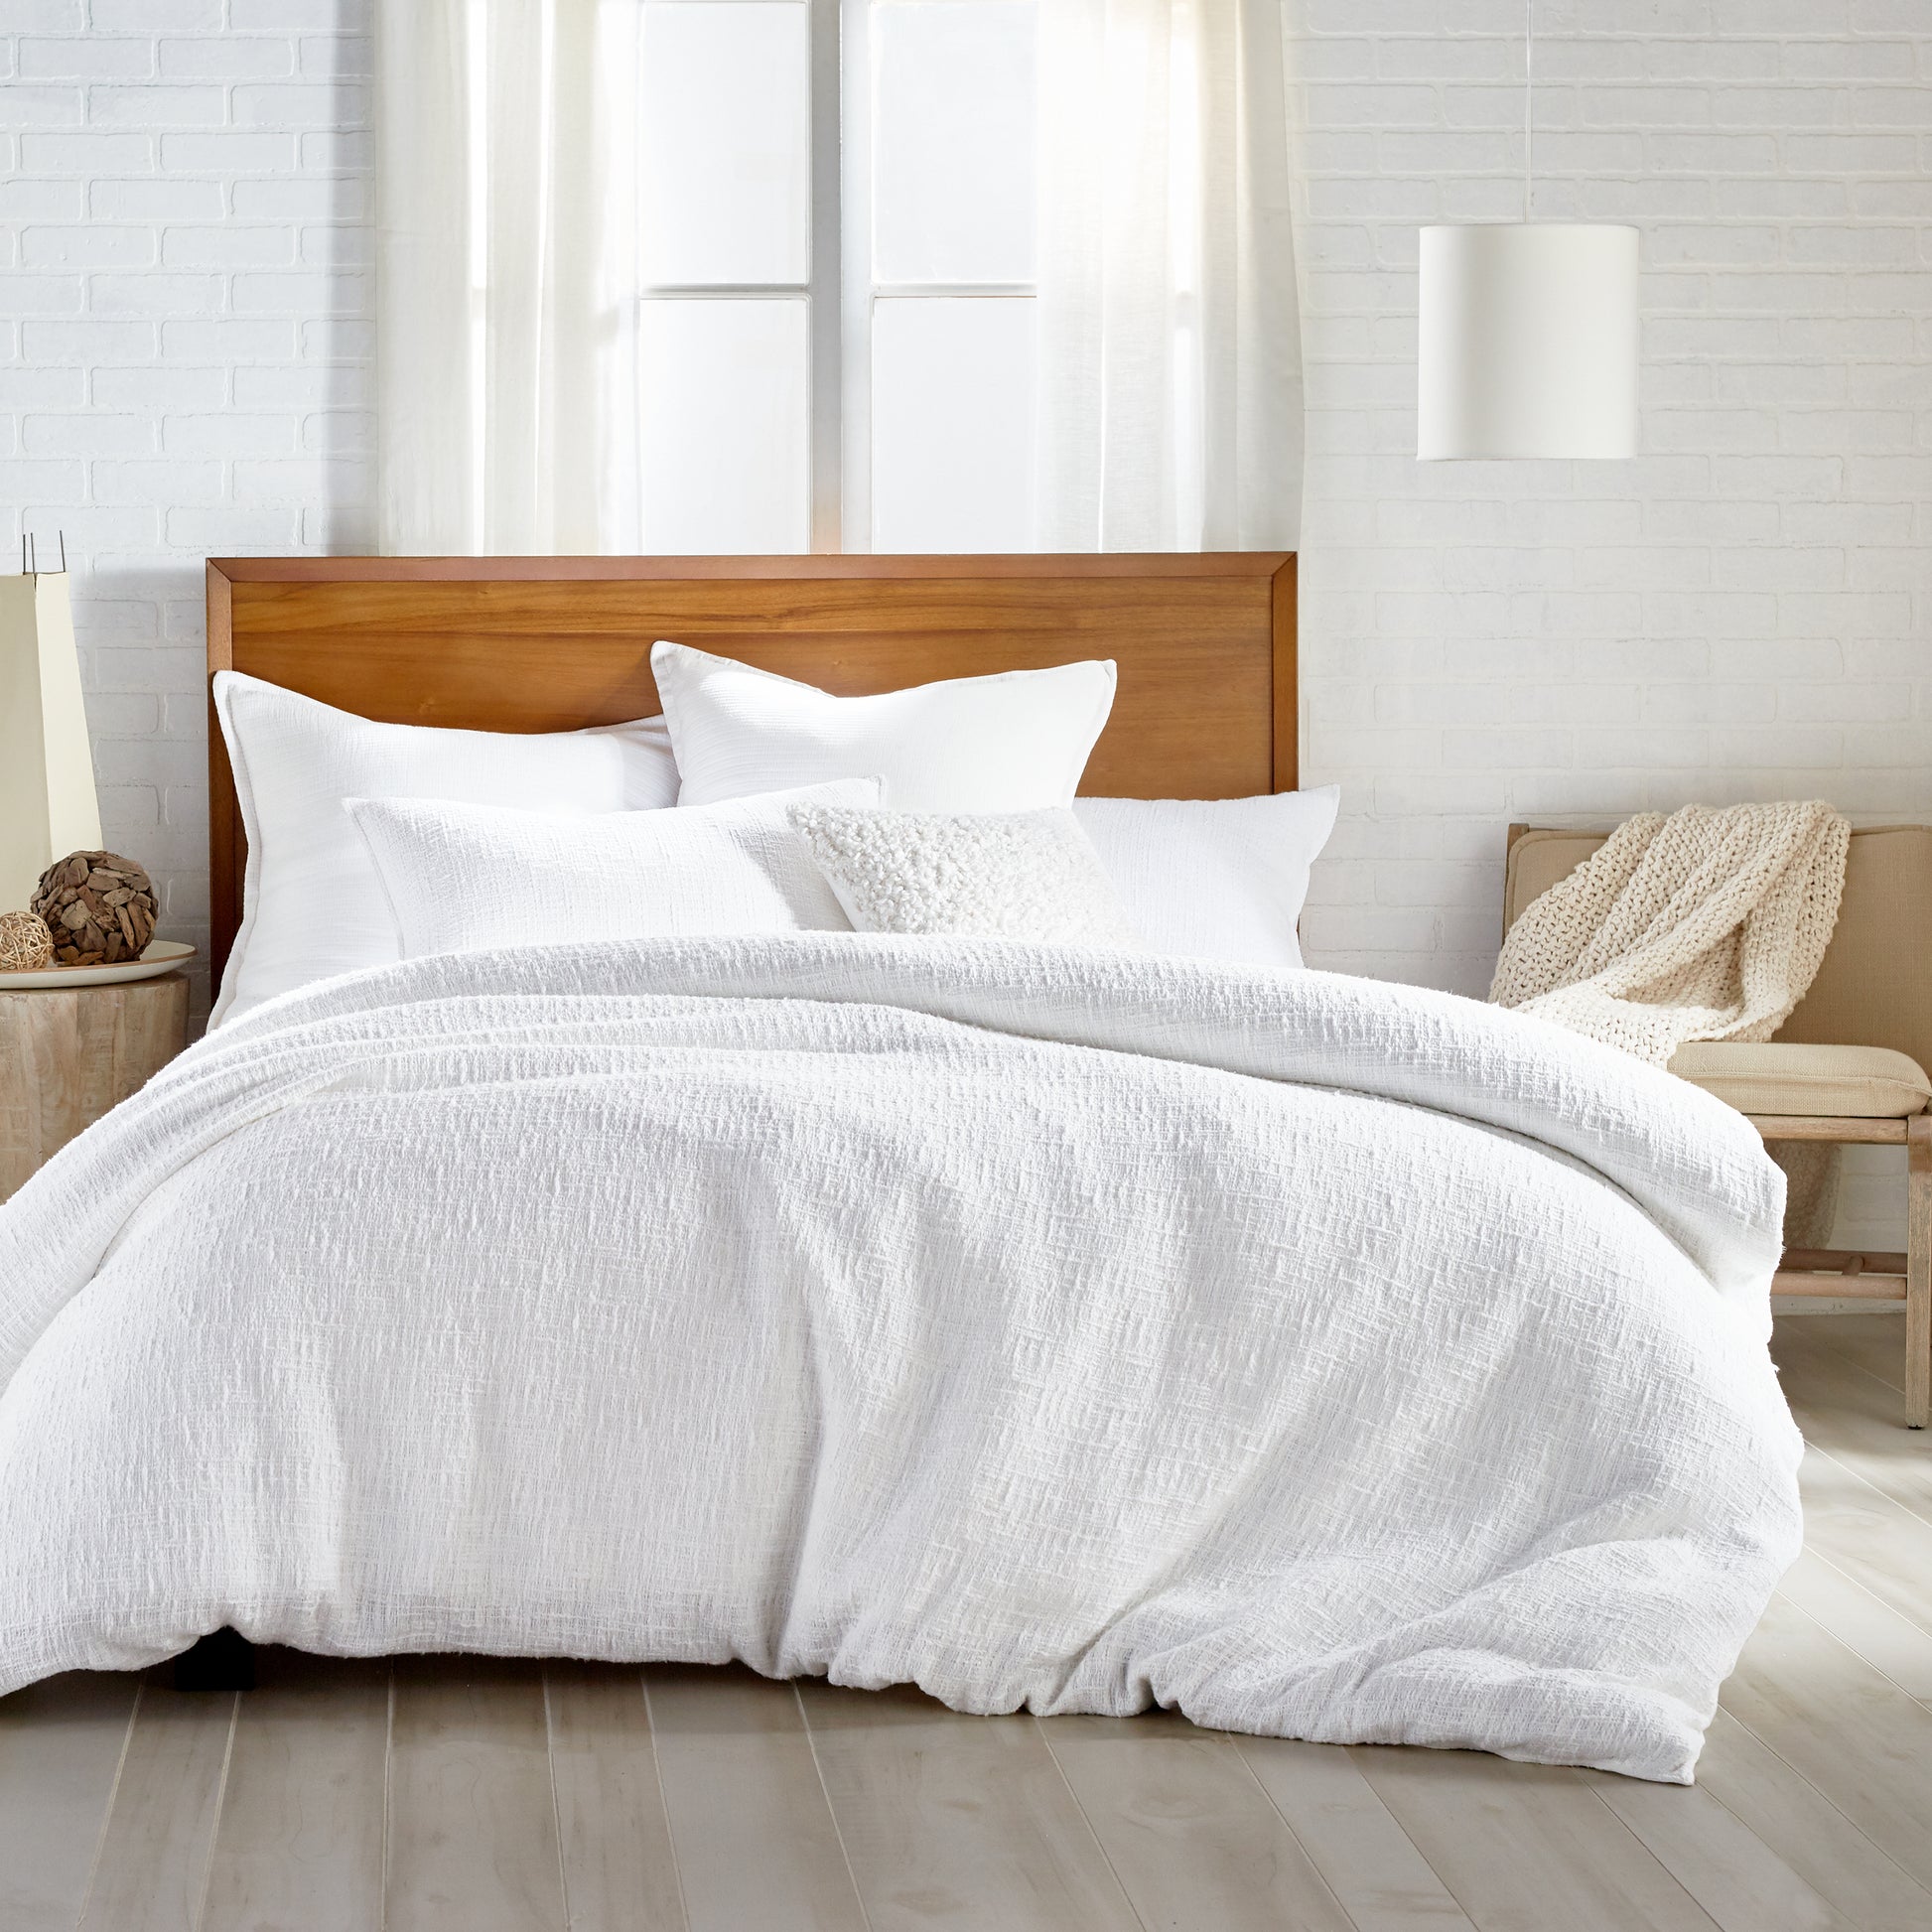 DKNY PURE Texture Bedding Duvet Collection White